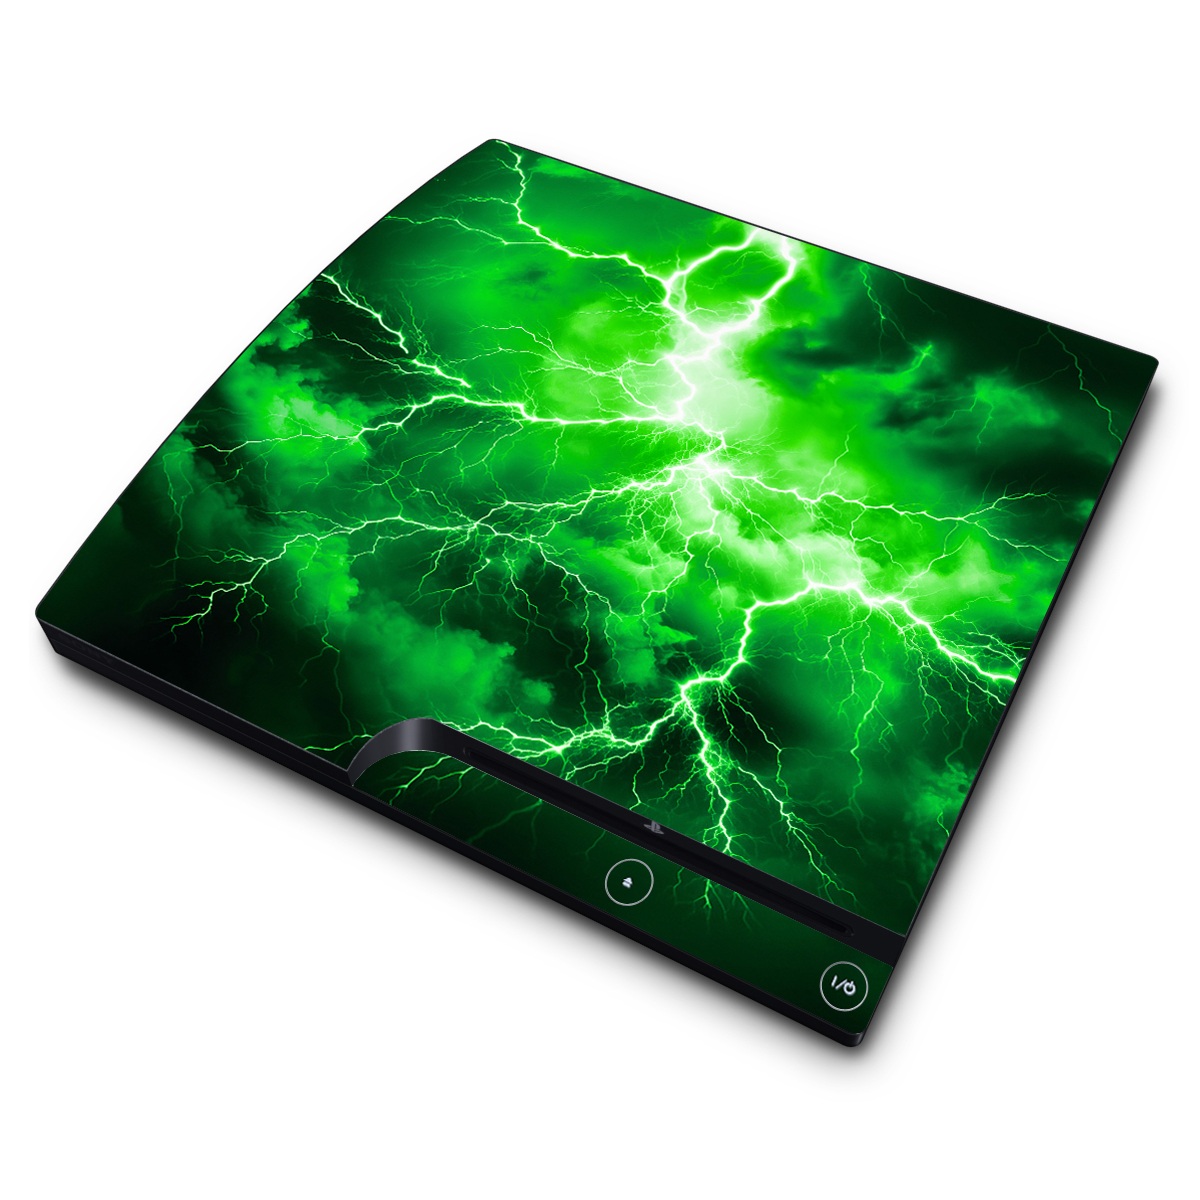 PlayStation 3 Slim Skin design of Water, Atmosphere, Thunder, Light, Green, Sky, Natural environment, Natural landscape, Electricity, Organism, with black, green colors